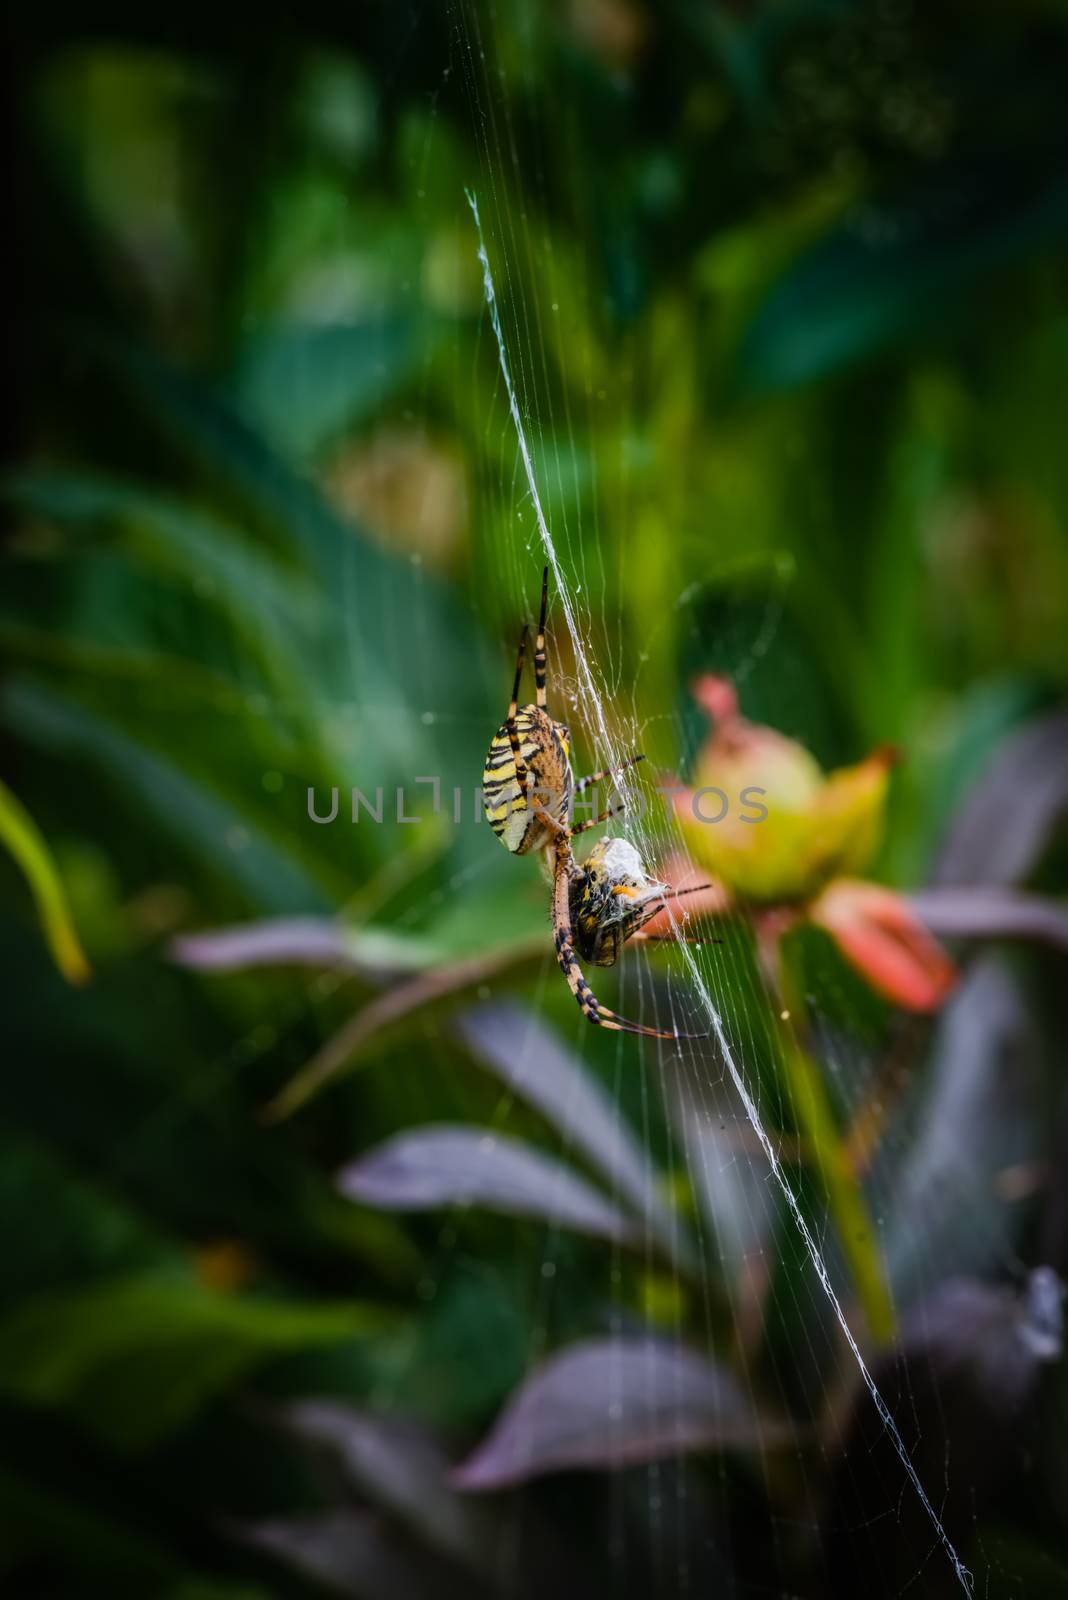 wasp spider eating bee on web by Nanisimova